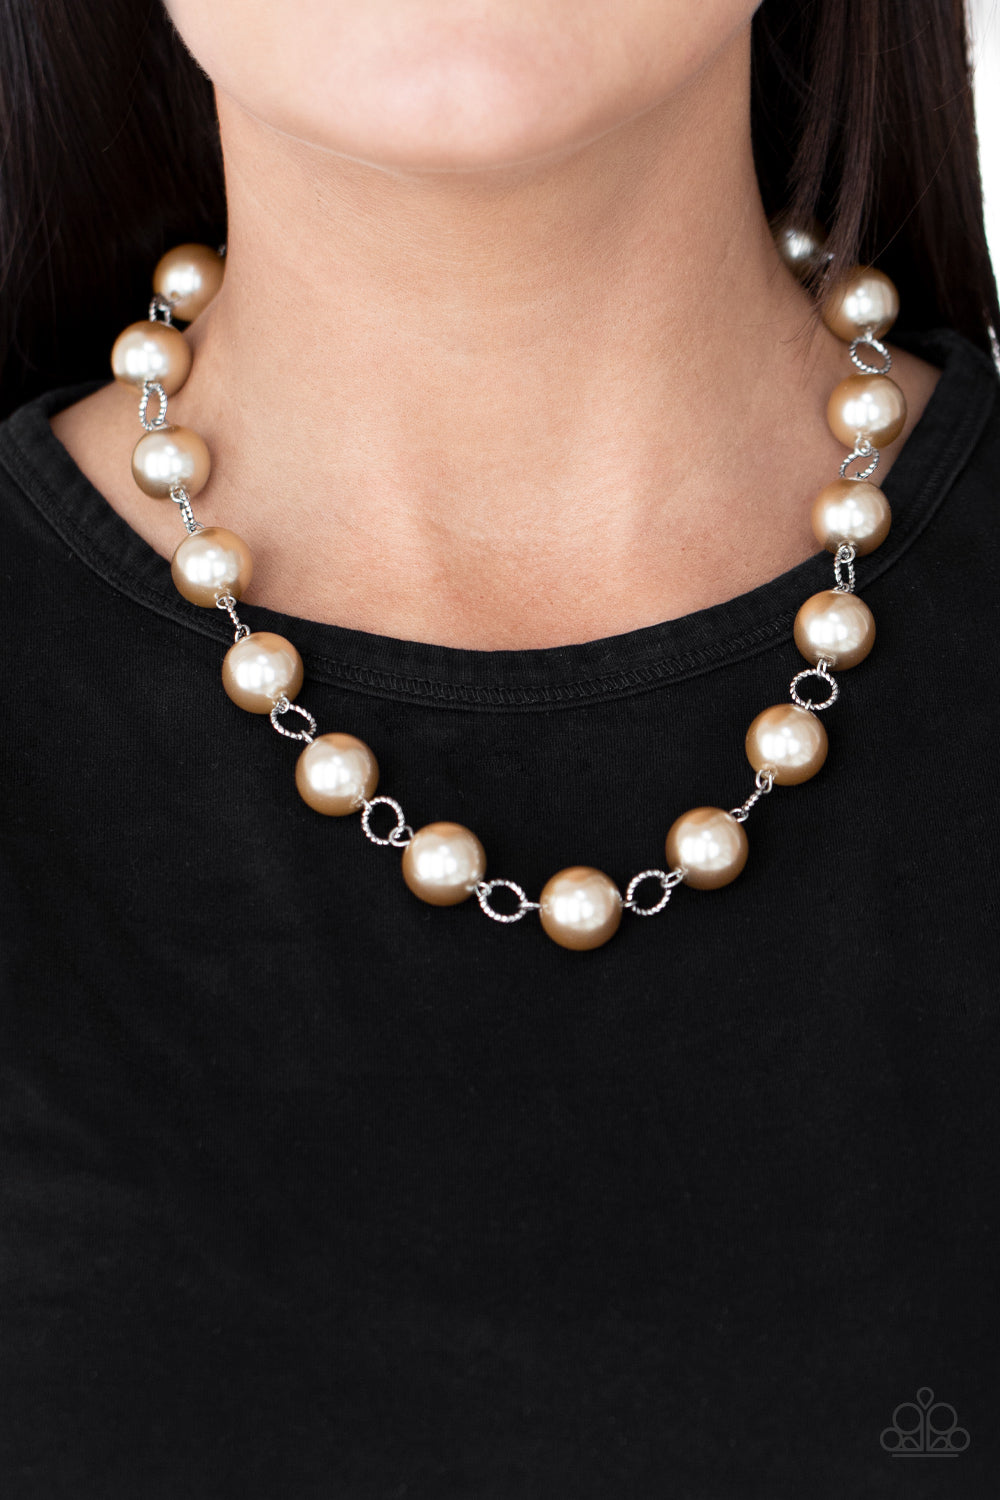 Paparazzi Ensconced in Elegance Brown Pearl Necklace. Get Free Shipping!